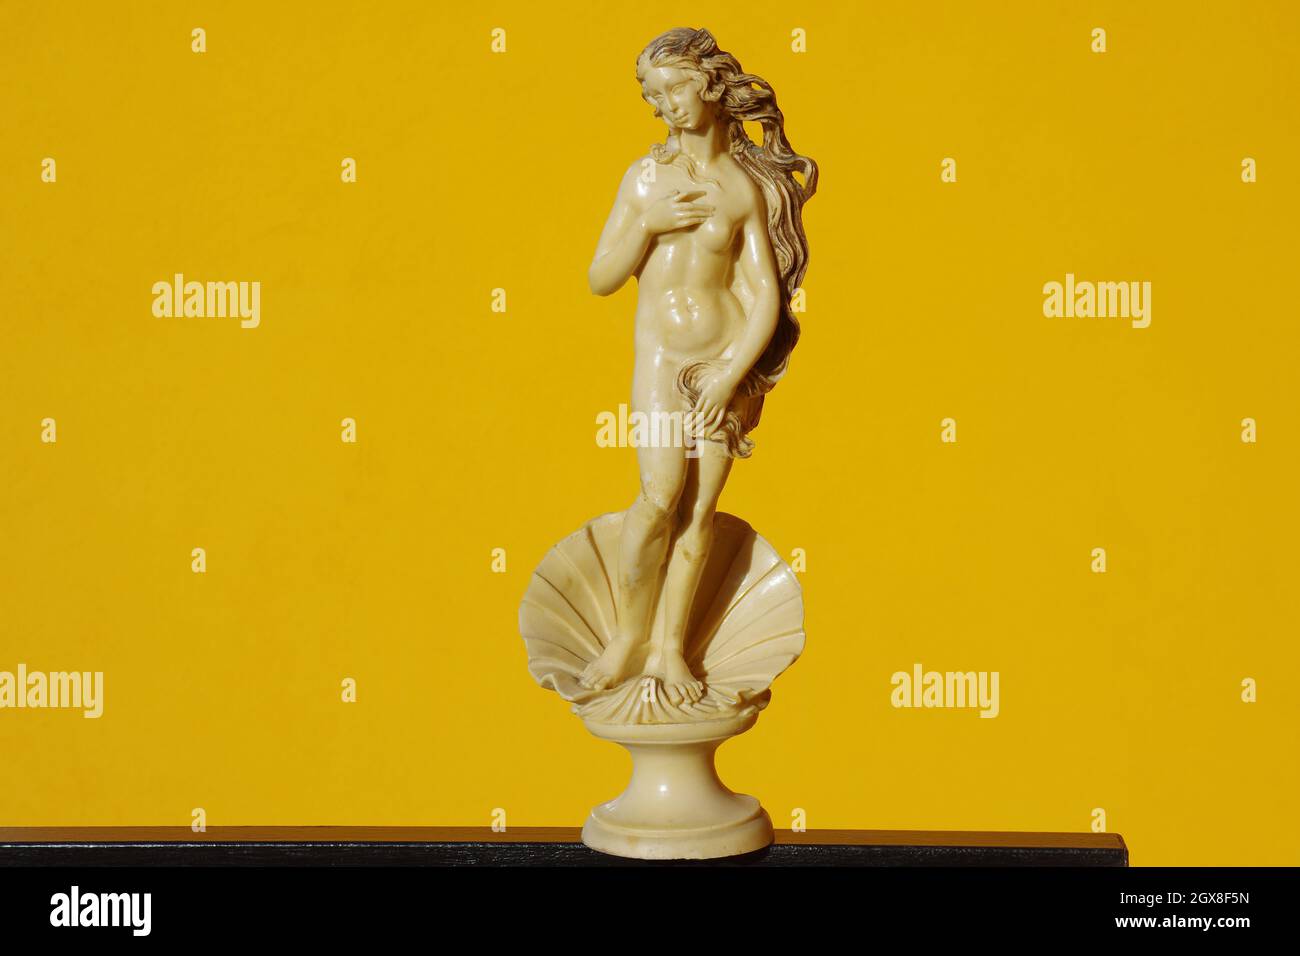 Scale reproduction after restoration of the statue representing the Birth of Venus by Botticelli on an orange background Stock Photo